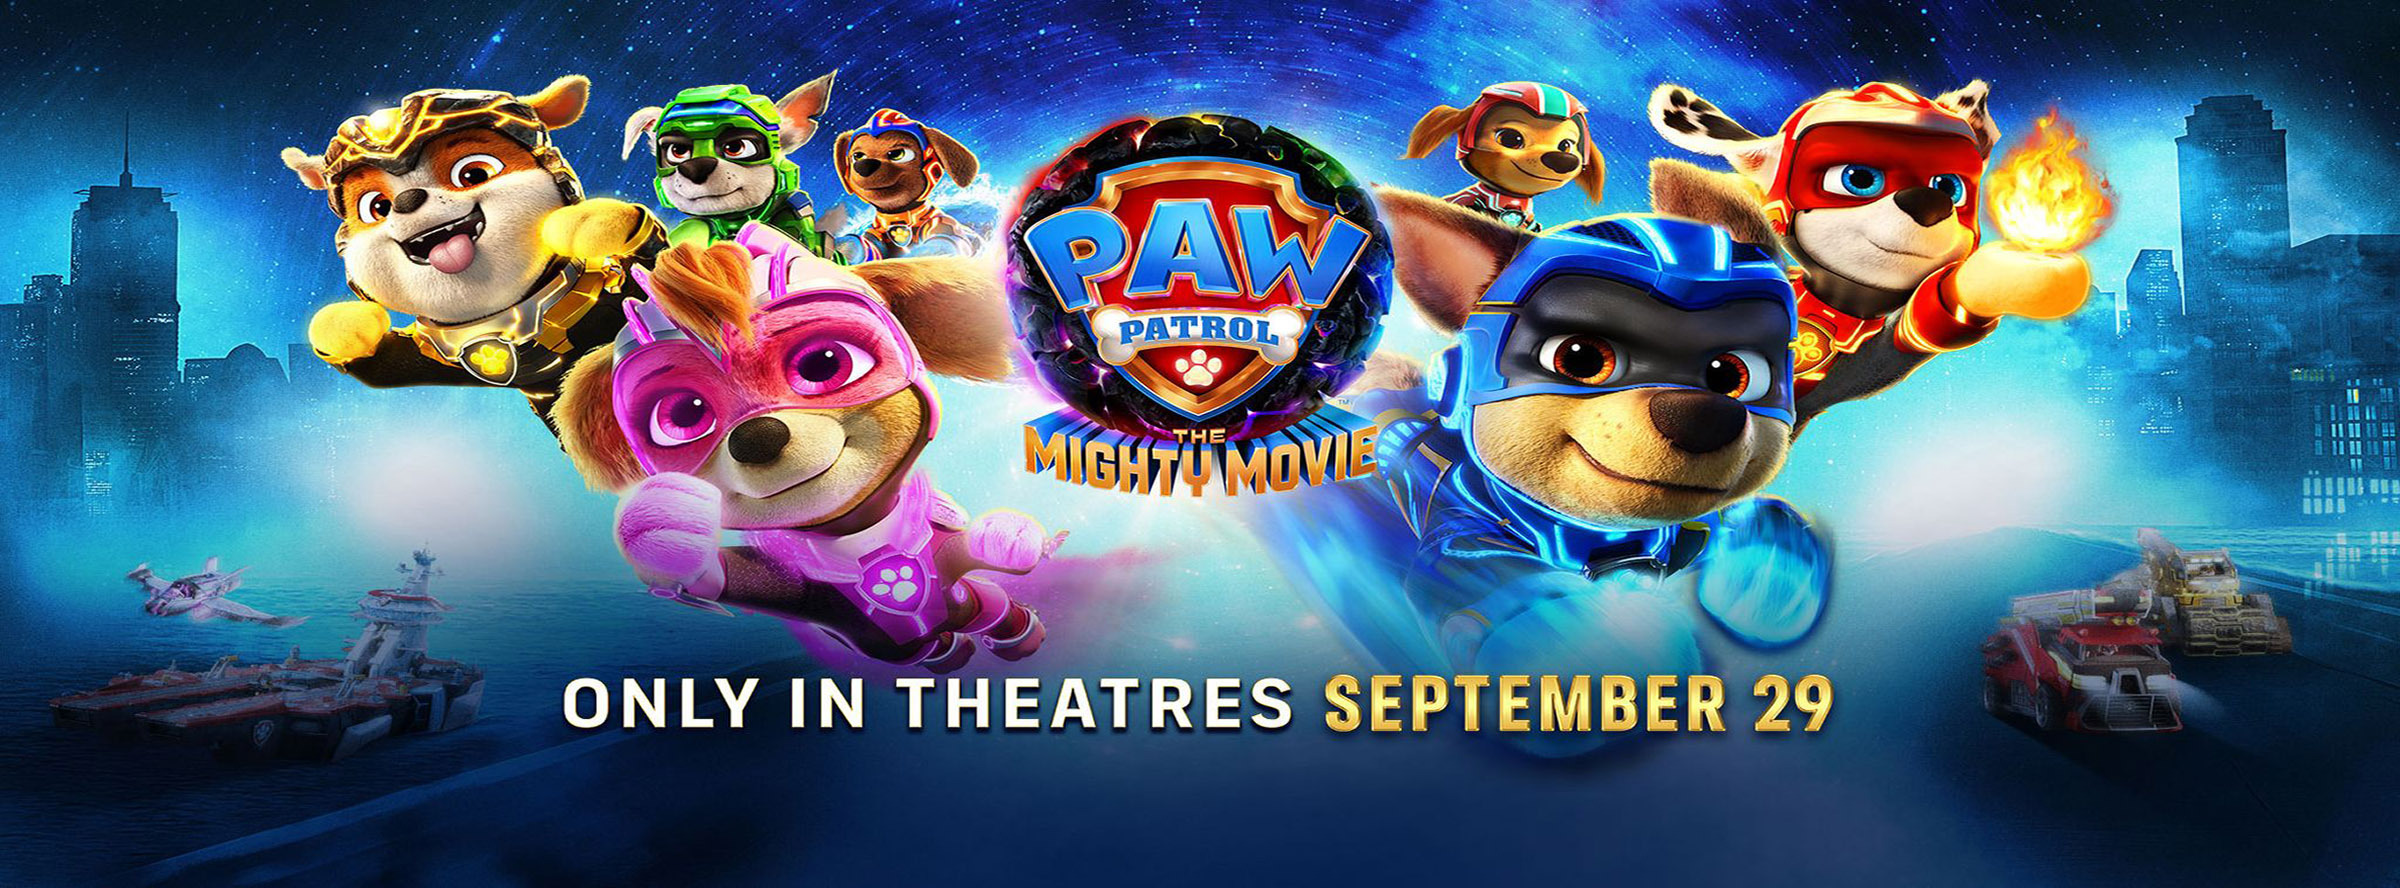 Slider Image for Paw Patrol: The Mighty Movie                                               